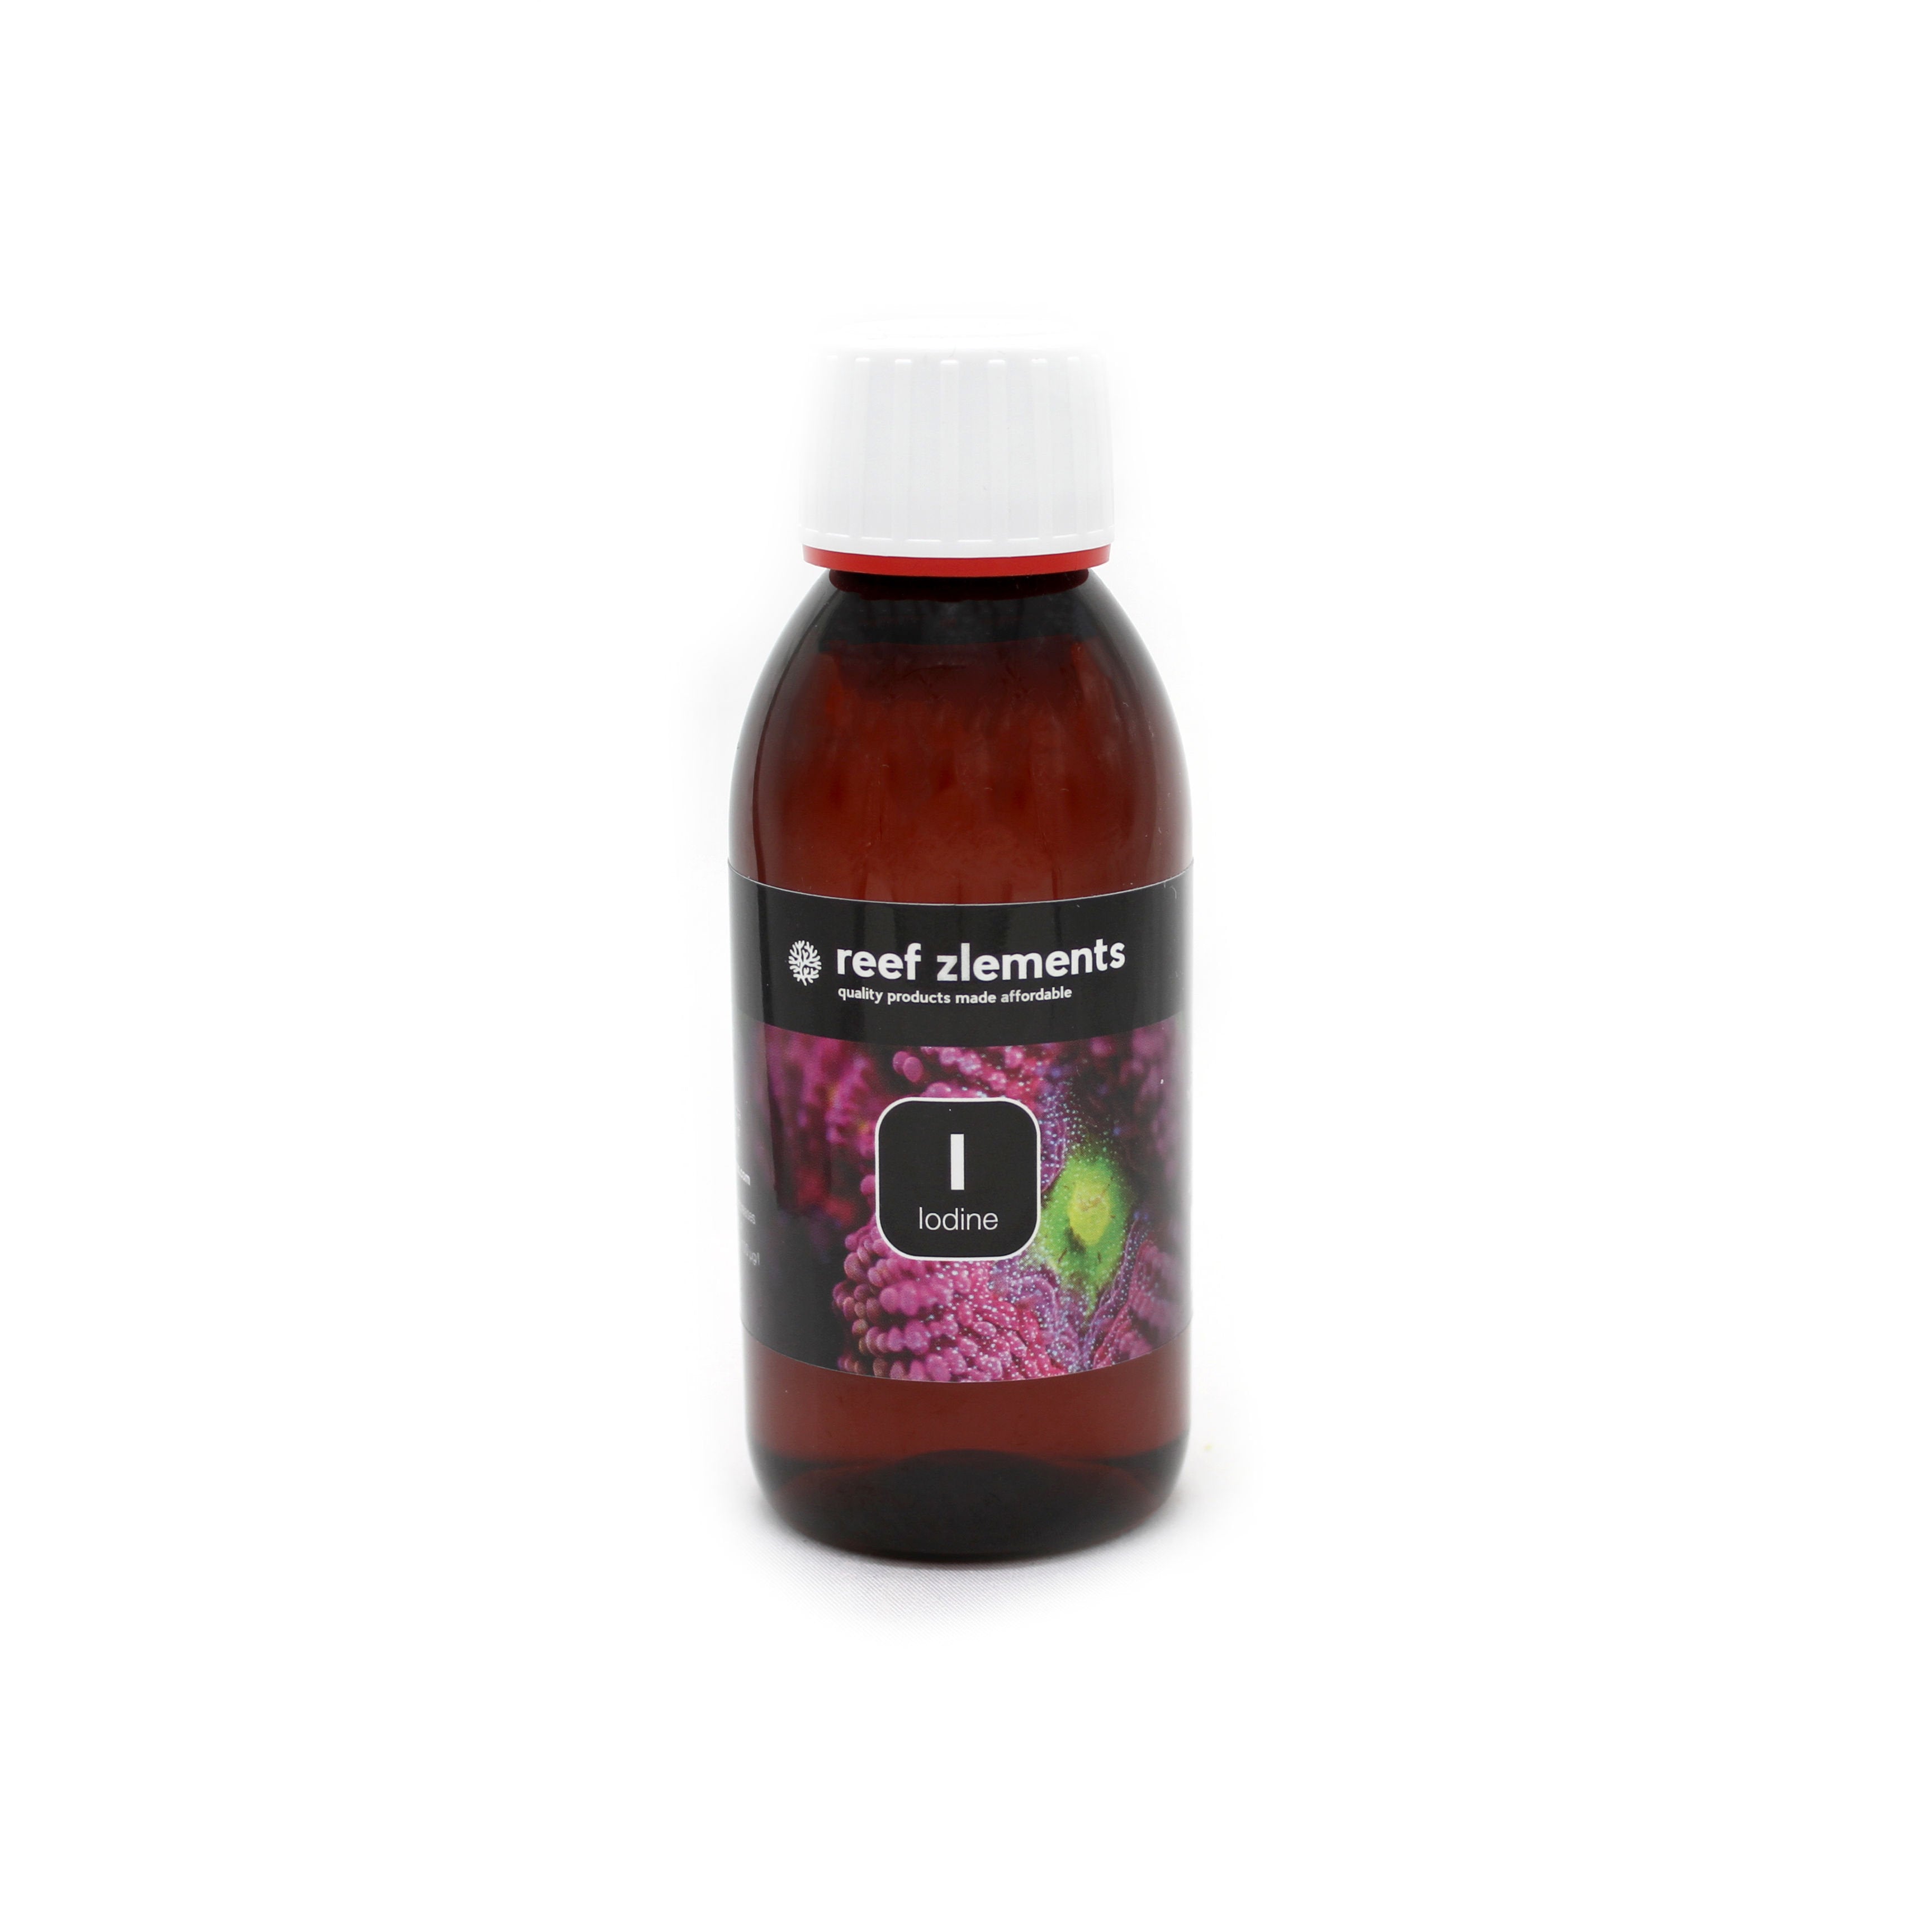 Reef Zlements Trace Elements - Iodine - 150ml